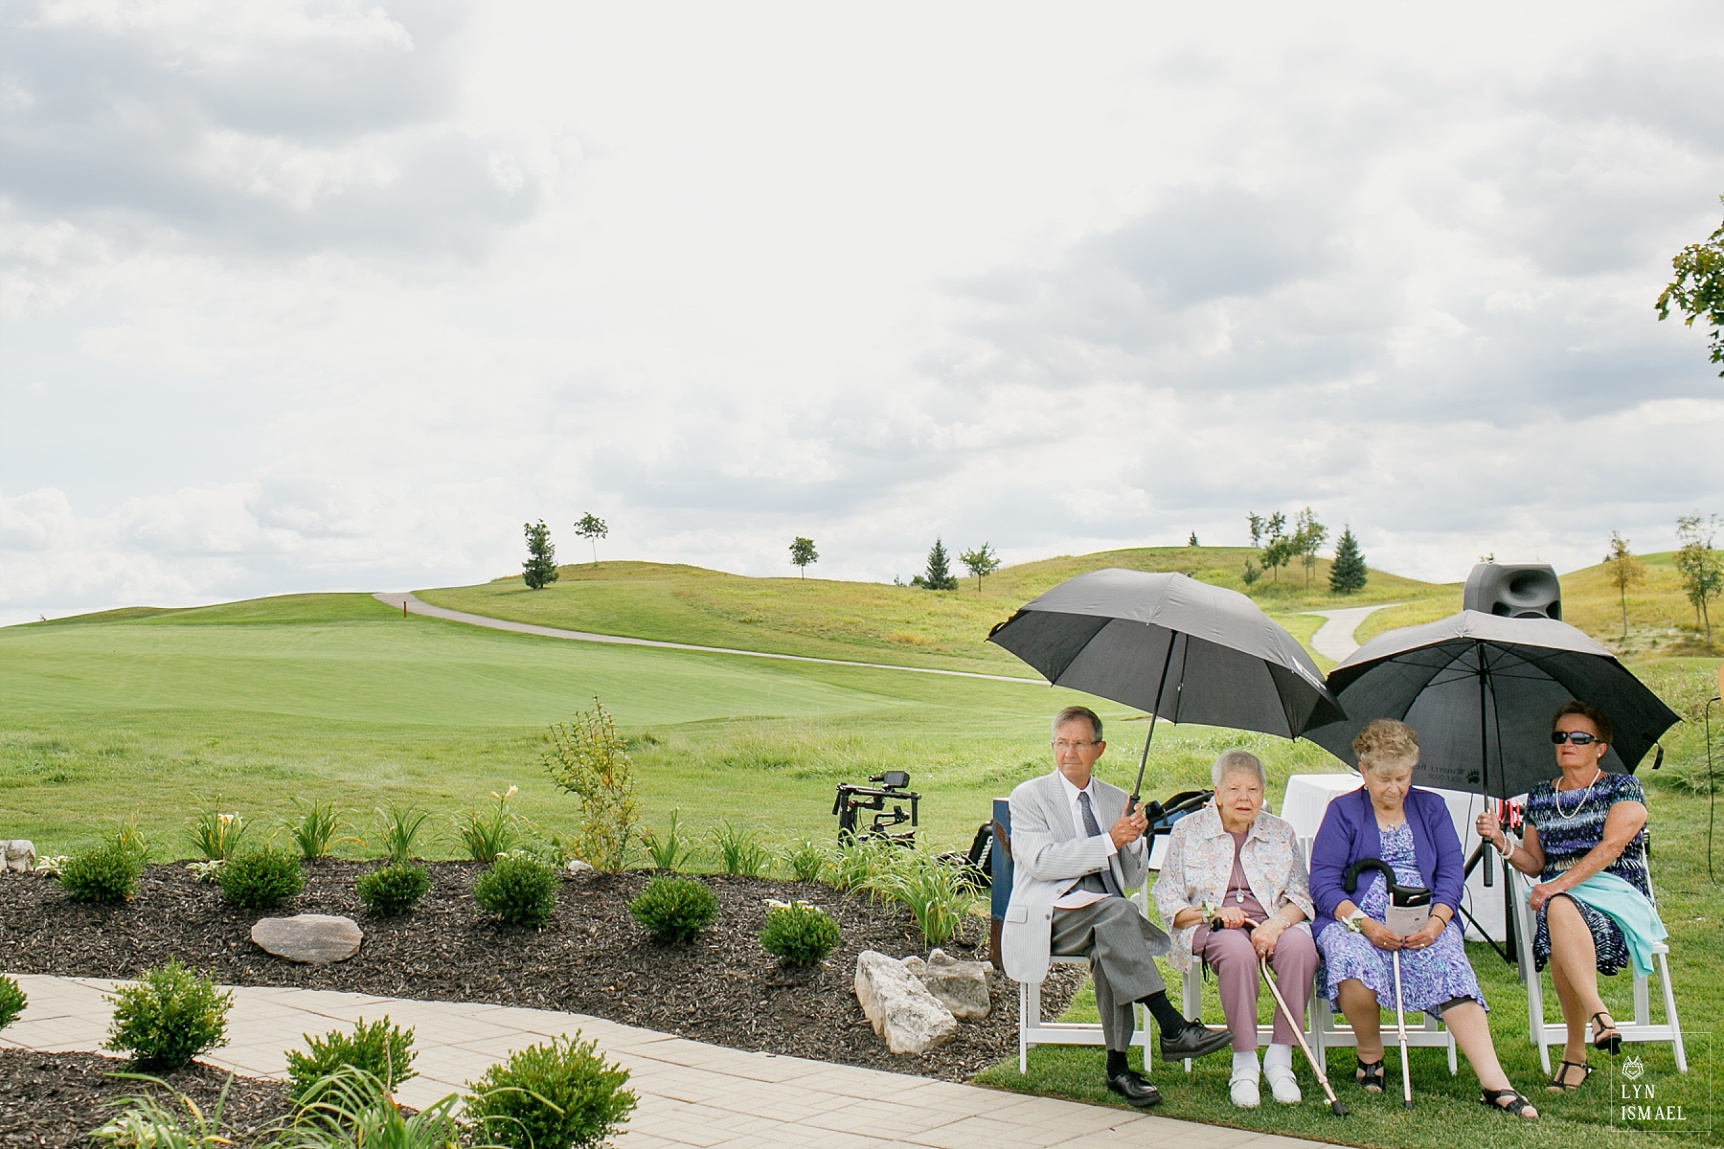 Grandparents of the bride and groom wait for the wedding ceremony to start at Whistle Bear Golf Course, an outdoor wedding venue in Waterloo region.